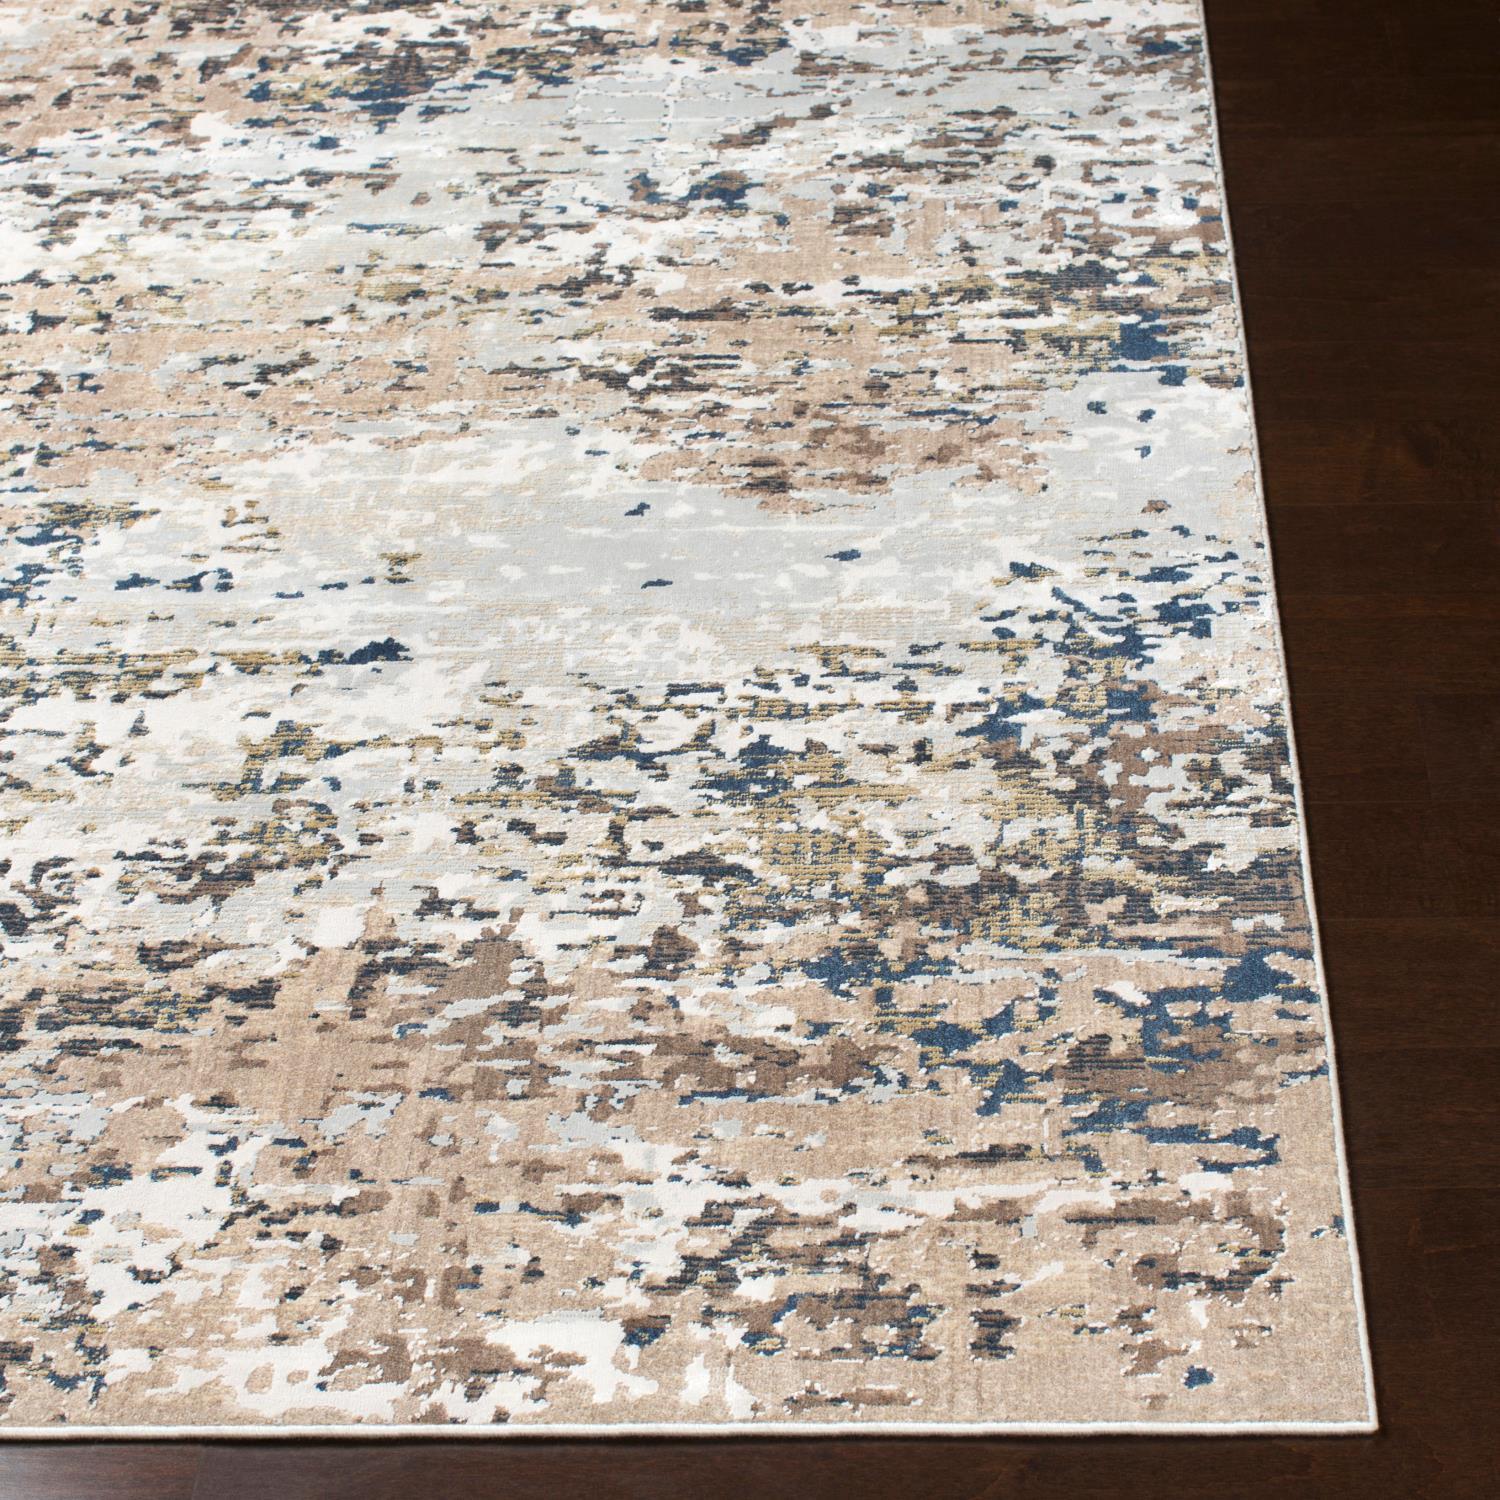 Surya Modern Milano Viscose And Polyester 2' x 3' Area Rugs MLN2300-23